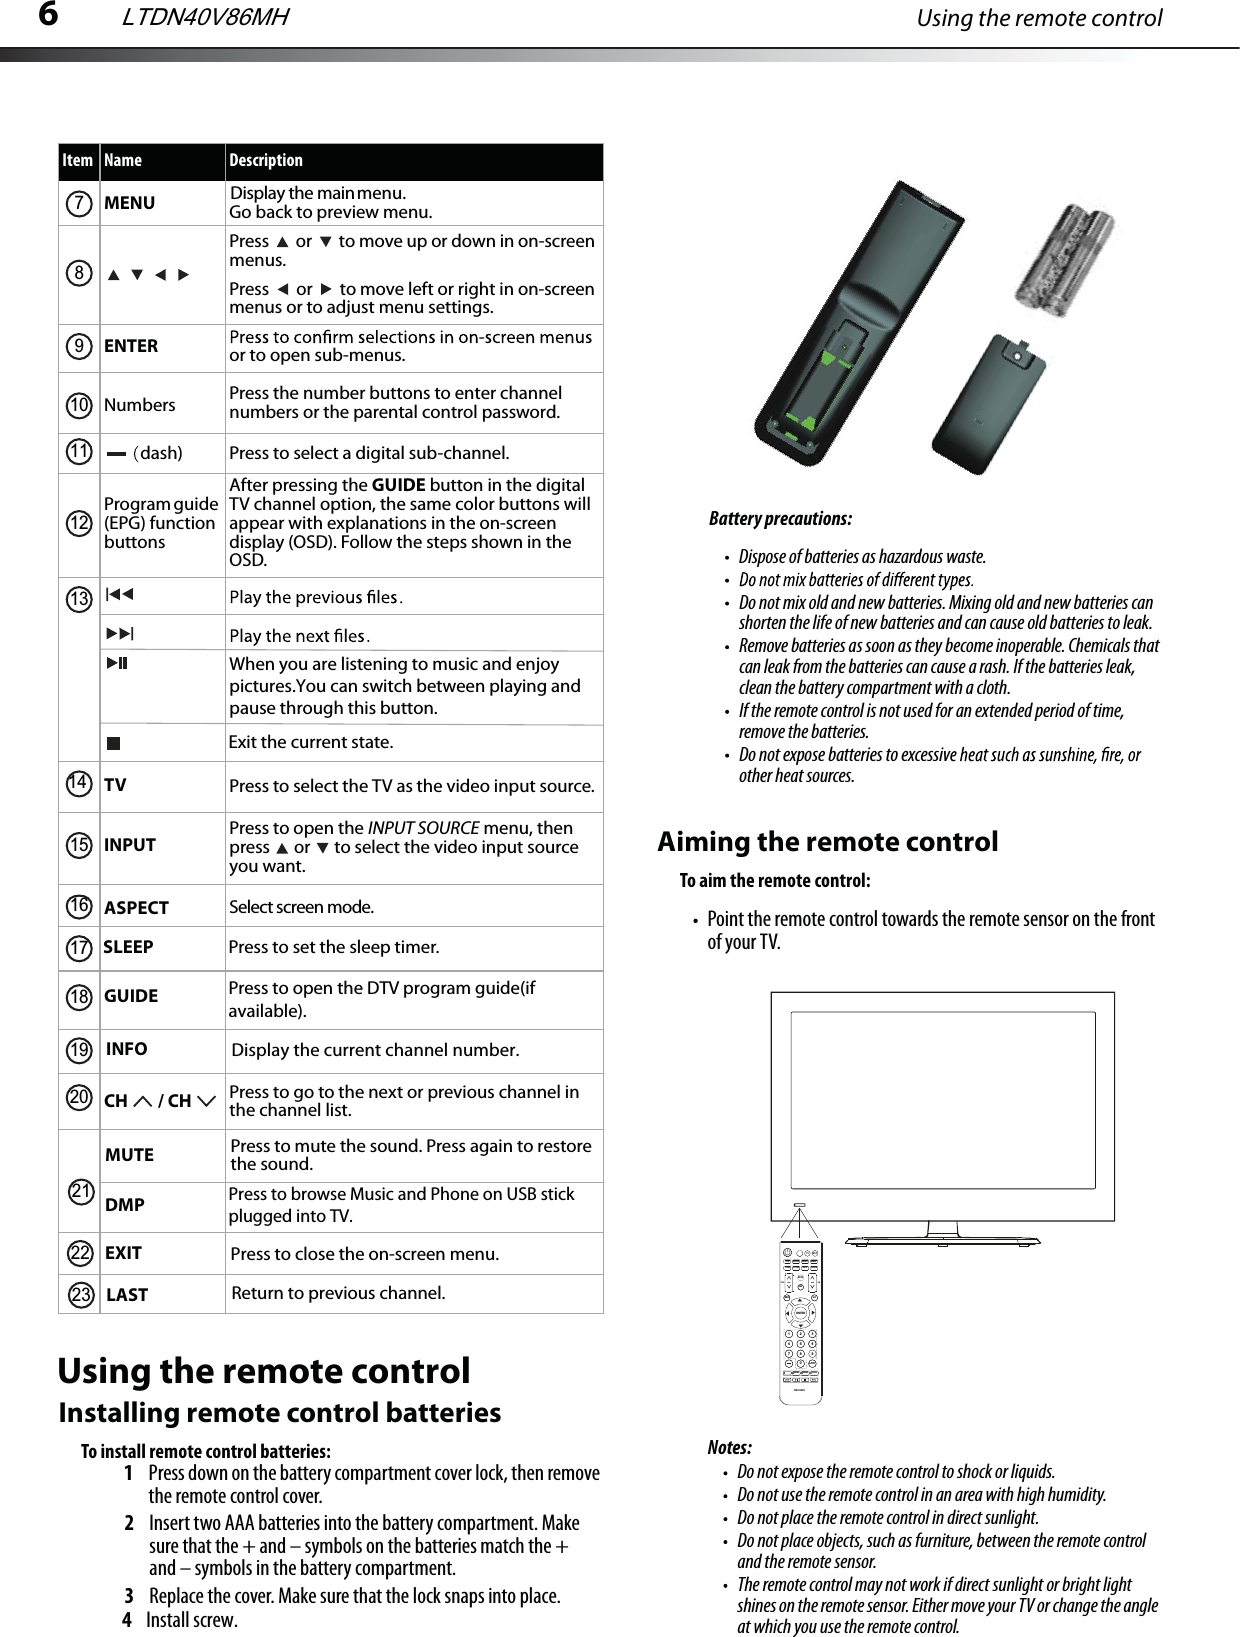 6Using the remote controlUsing the remote controlInstalling remote control batteriesTo install remote control batteries:1Press down on the battery compartment cover lock, then remove the remote control cover.2Insert two AAA batteries into the battery compartment. Make sure that the + and – symbols on the batteries match the + and – symbols in the battery compartment.3Replace the cover. Make sure that the lock snaps into place.4 Install screw.Battery precautions: Dispose of batteries as hazardous waste.Do not mix old and new batteries. Mixing old and new batteries can shorten the life of new batteries and can cause old batteries to leak.Remove batteries as soon as they become inoperable. Chemicals that can leak from the batteries can cause a rash. If the batteries leak, clean the battery compartment with a cloth.If the remote control is not used for an extended period of time, remove the batteries.Do not expose batteries to excessivother heat sources.MENU Display the main menu.Press   or   to move up or down in on-screen menus.Press   or   to move left or right in on-screen menus or to adjust menu settings.ENTER or to open sub-menus.Numbersdash)Press the number buttons to enter channel numbers or the parental control password.Press to select a digital sub-channel.Program guide (EPG) function buttonsAfter pressing the GUIDE button in the digital TV channel option, the same color buttons will appear with explanations in the on-screen display (OSD). Follow the steps shown in the OSD.TV Press to select the TV as the video input source. Select screen mode.INPUT Press to open the INPUT SOURCE menu, then press   or   to select the video input source you want. ASPECTGUIDECH  / CH Press to go to the next or previous channel in the channel list. Item Name Description7891011121314151617181920INFO Display the current channel number.MUTEDMPPress to mute the sound. Press again to restore Press to browse Music and Phone on USB stick plugged into TV.the sound.EXIT Press to close the on-screen menu.LAST Return to previous channel.SLEEP Press to set the sleep timer. Press to open the DTV program guide(if available). 212223Aiming the remote controlTo aim the remote control:Point the remote control towards the remote sensor on the front of your TV.Notes:Do not expose the remote control to shock or liquids.Do not use the remote control in an area with high humidity.Do not place the remote control in direct sunlight.Do not place objects, such as furniture, between the remote control and the remote sensor.The remote control may not work if direct sunlight or bright light shines on the remote sensor. Either move your TV or change the angle at which you use the remote control.INPUTENTER7   8  0  EN-31205ASPECTGUIDEINFOMENUCHVOLDMPCCDMTS/SAPSLEEPSOUNDEXITTV1   23  5   6  4  7   8   9  0  LASTPICTUREMUTELTDN40V86MHWhen you are listening to music and enjoy pictures.You can switch between playing and pause through this button.Exit the current state.Go back to preview menu.